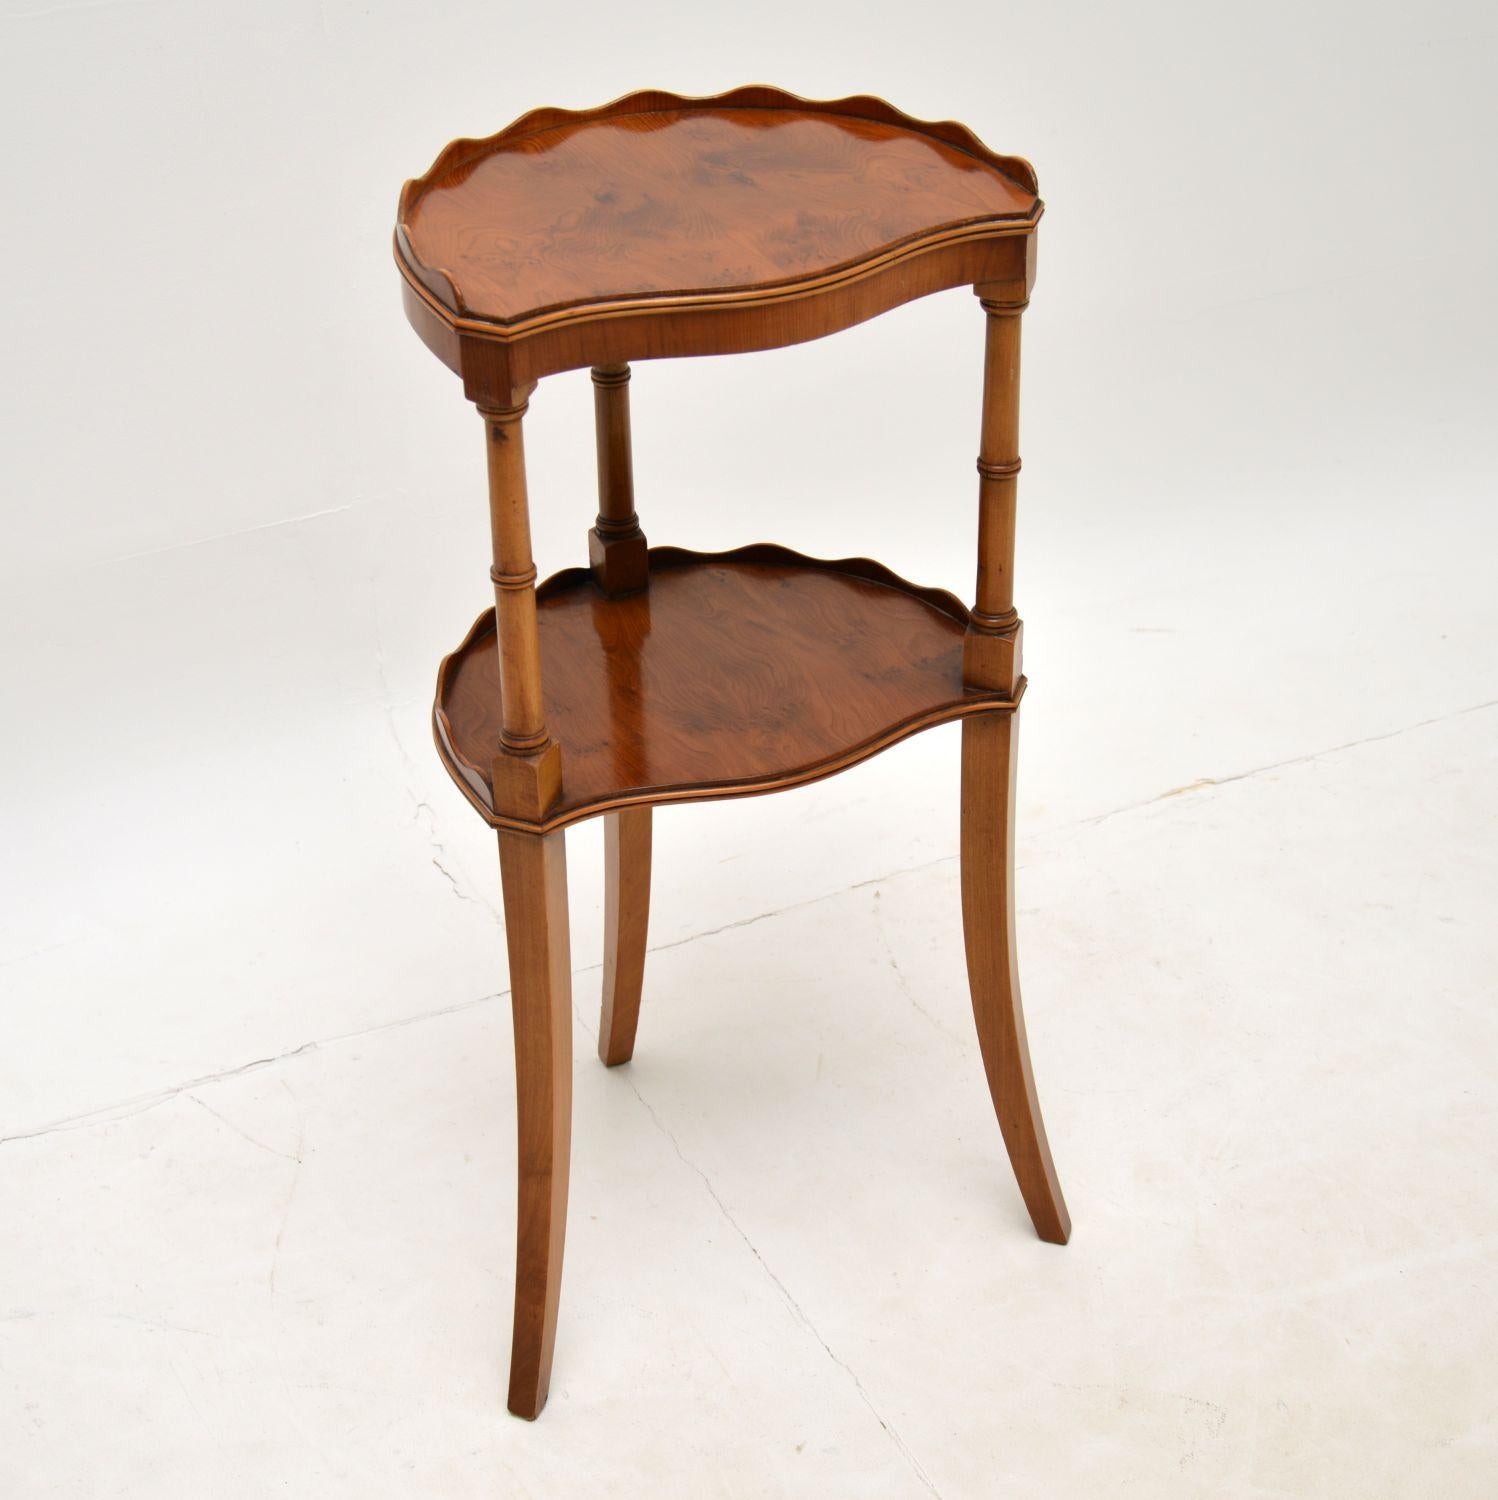 English Antique Regency Style Yew Wood Side Table